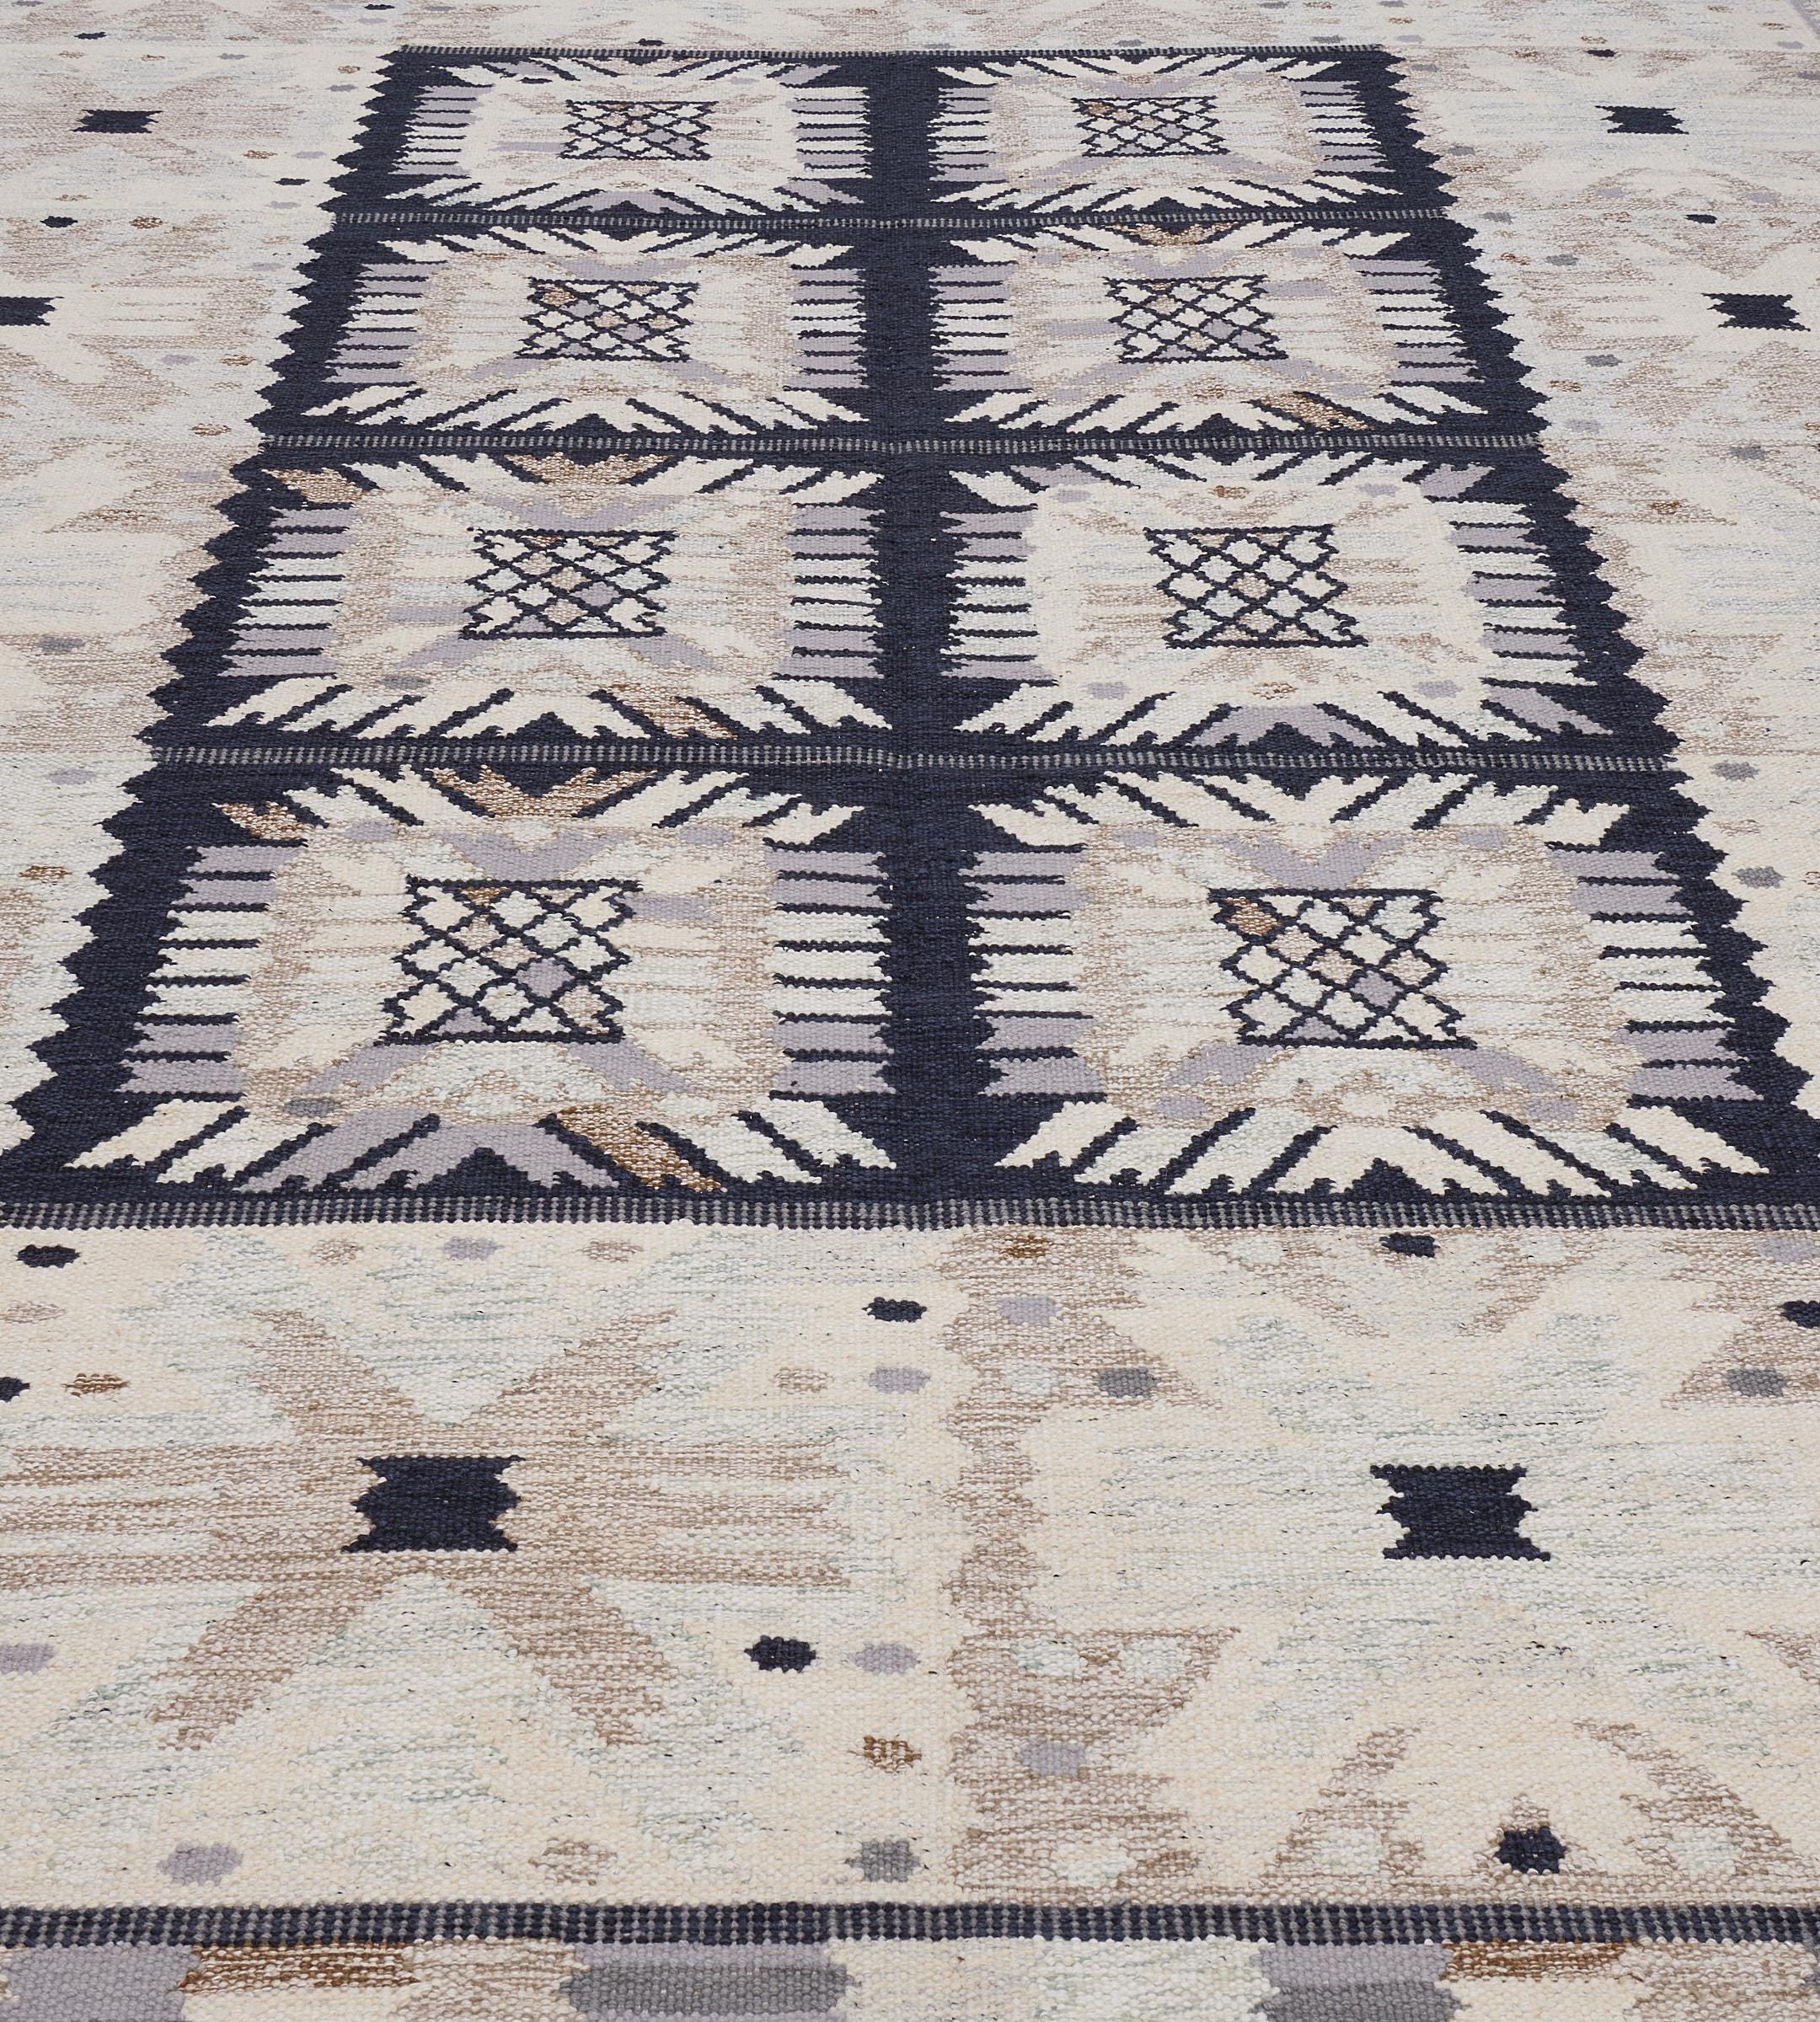 The Swedish collection is primarily inspired by vintage Swedish flat-weave rugs, whose geometric designs are relevant as ever in the 21st century. The collection utilizes a number of flat-weave techniques, yielding various unique textures.